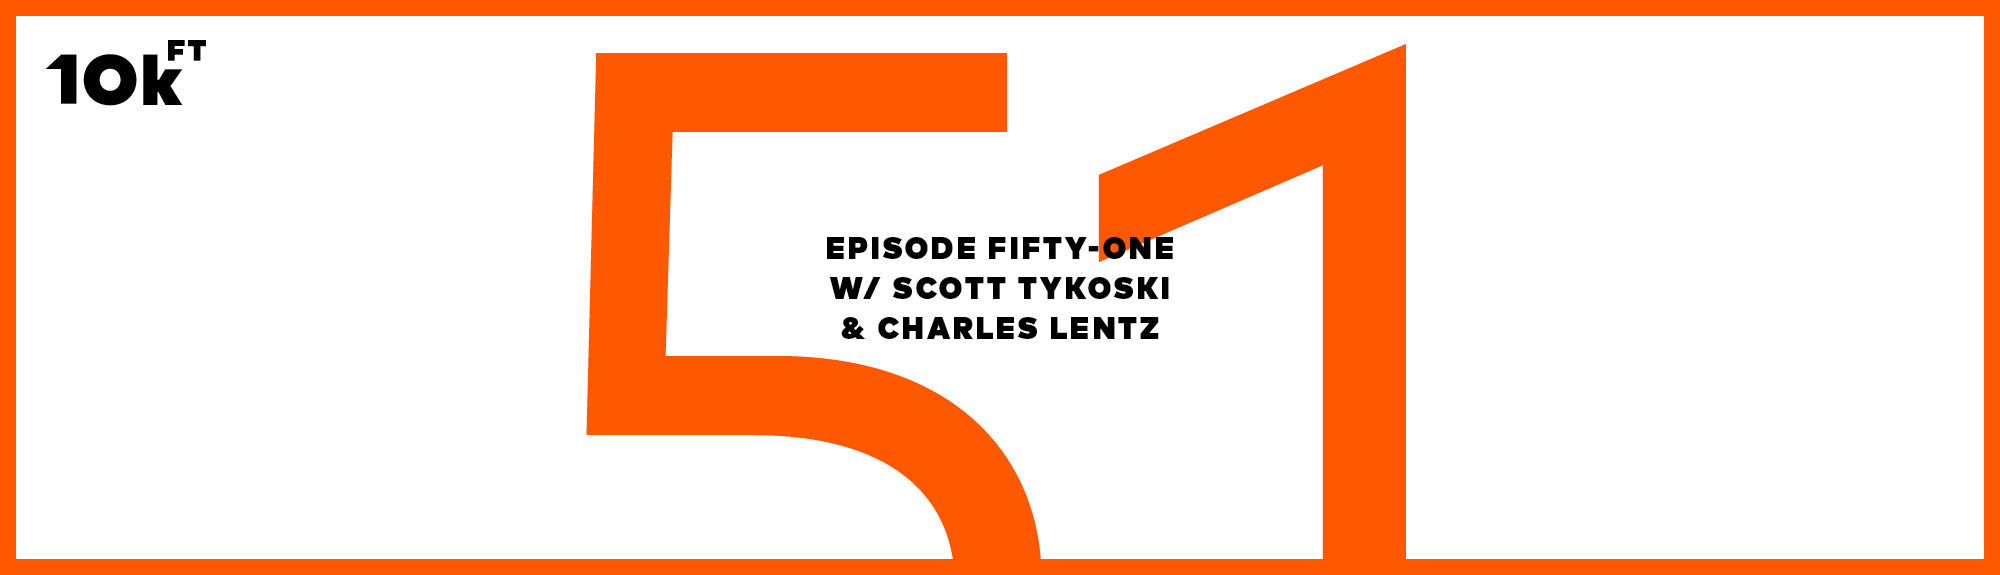 Orange rectangle with a white inside background. Top right corner has "10k ft" written. In the middle, the text reads "Episode Fifty-One w/ Scott Tykoski & Charles Lentz". A large "51" is written in orange behind this middle text.